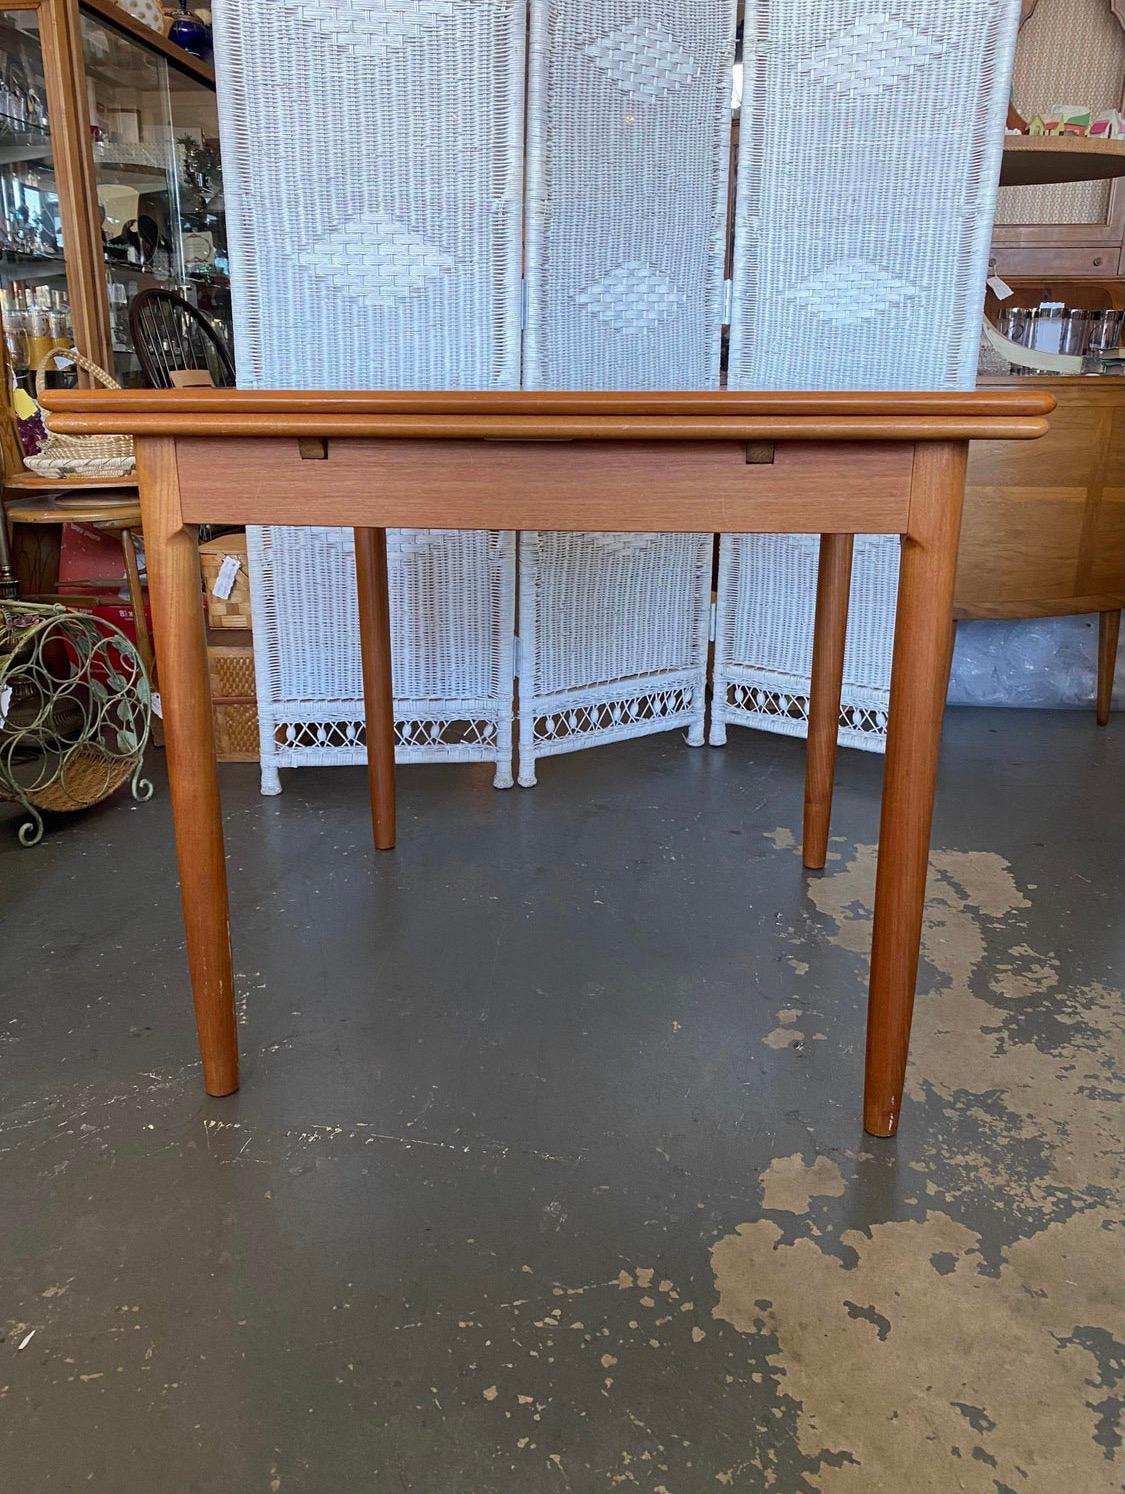 Great Mid-Century Modern teak, square dining table made by AM (Ansager Mobler) in Denmark. This table is an excellent space saver that can easily turned into a full dining table seating 6 when extended using both pullout leaves. Fully extended, the